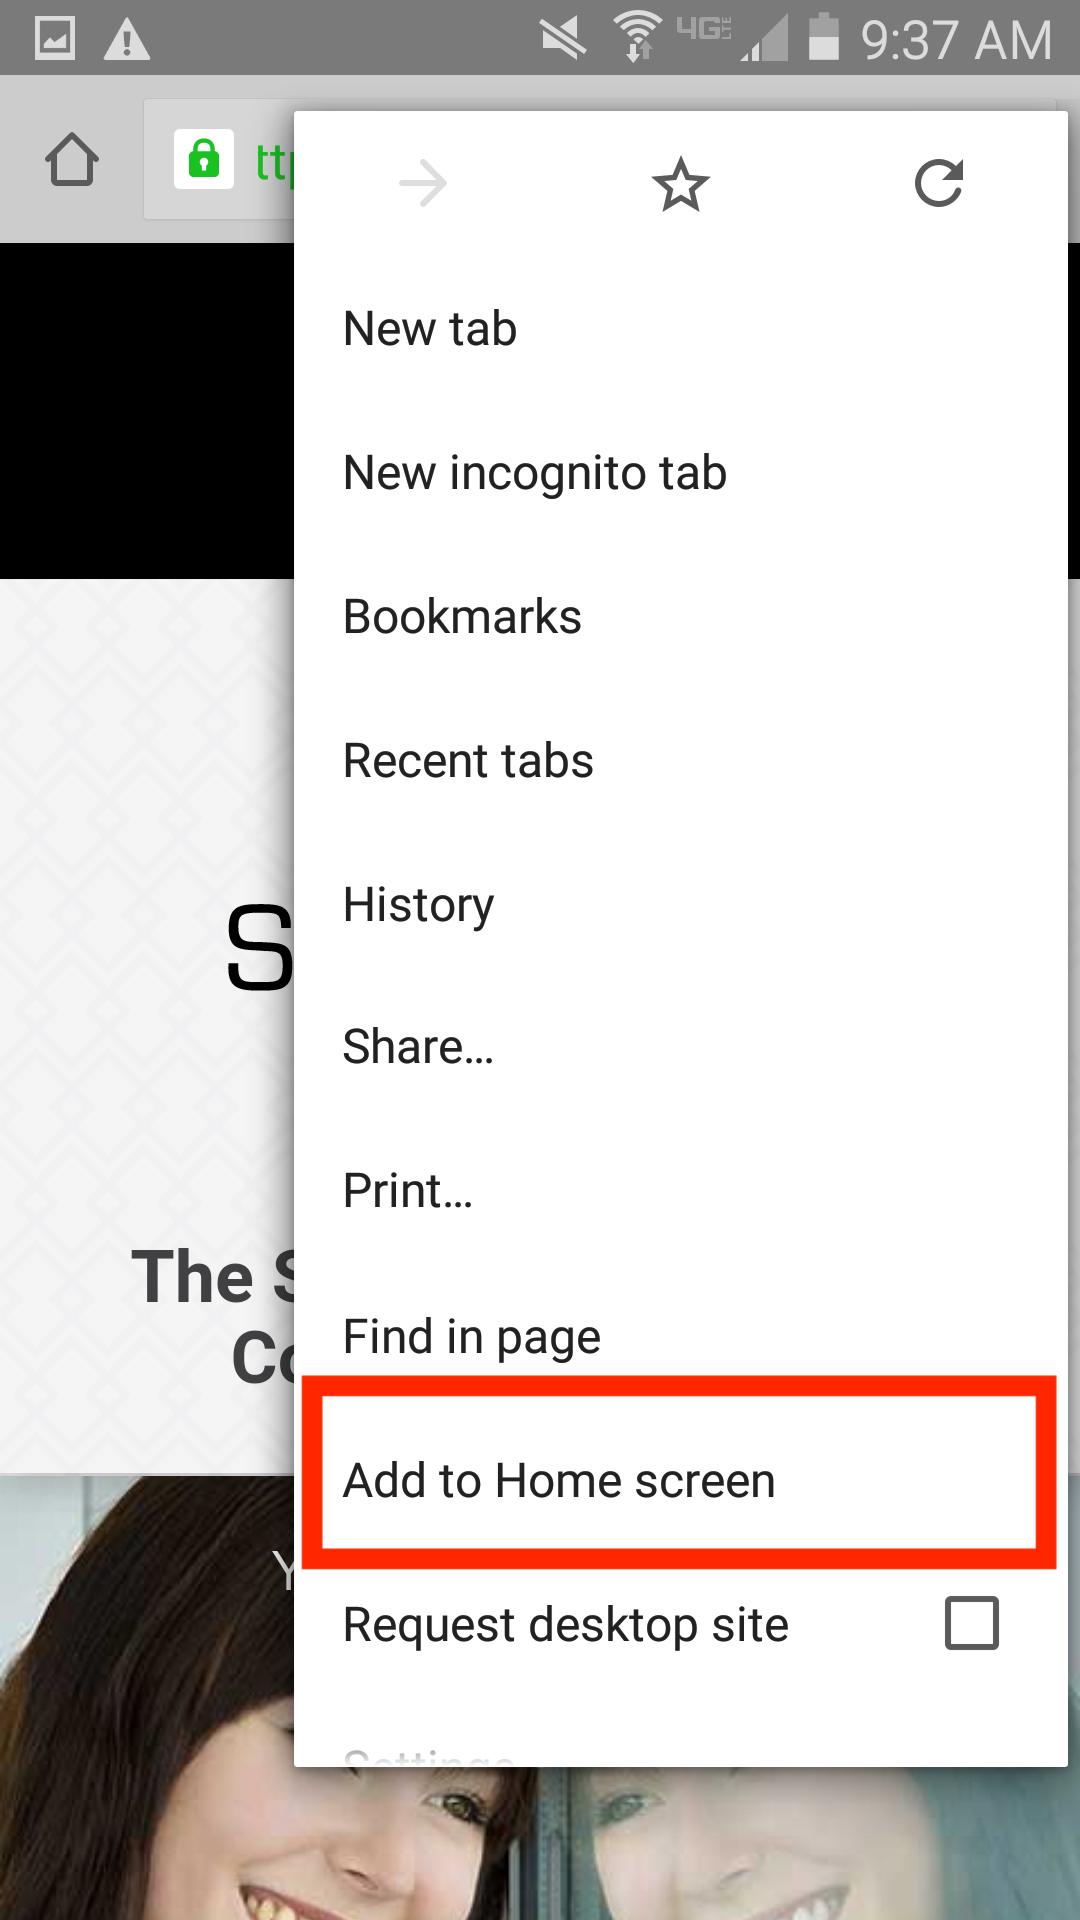 Select "Add to home screen".